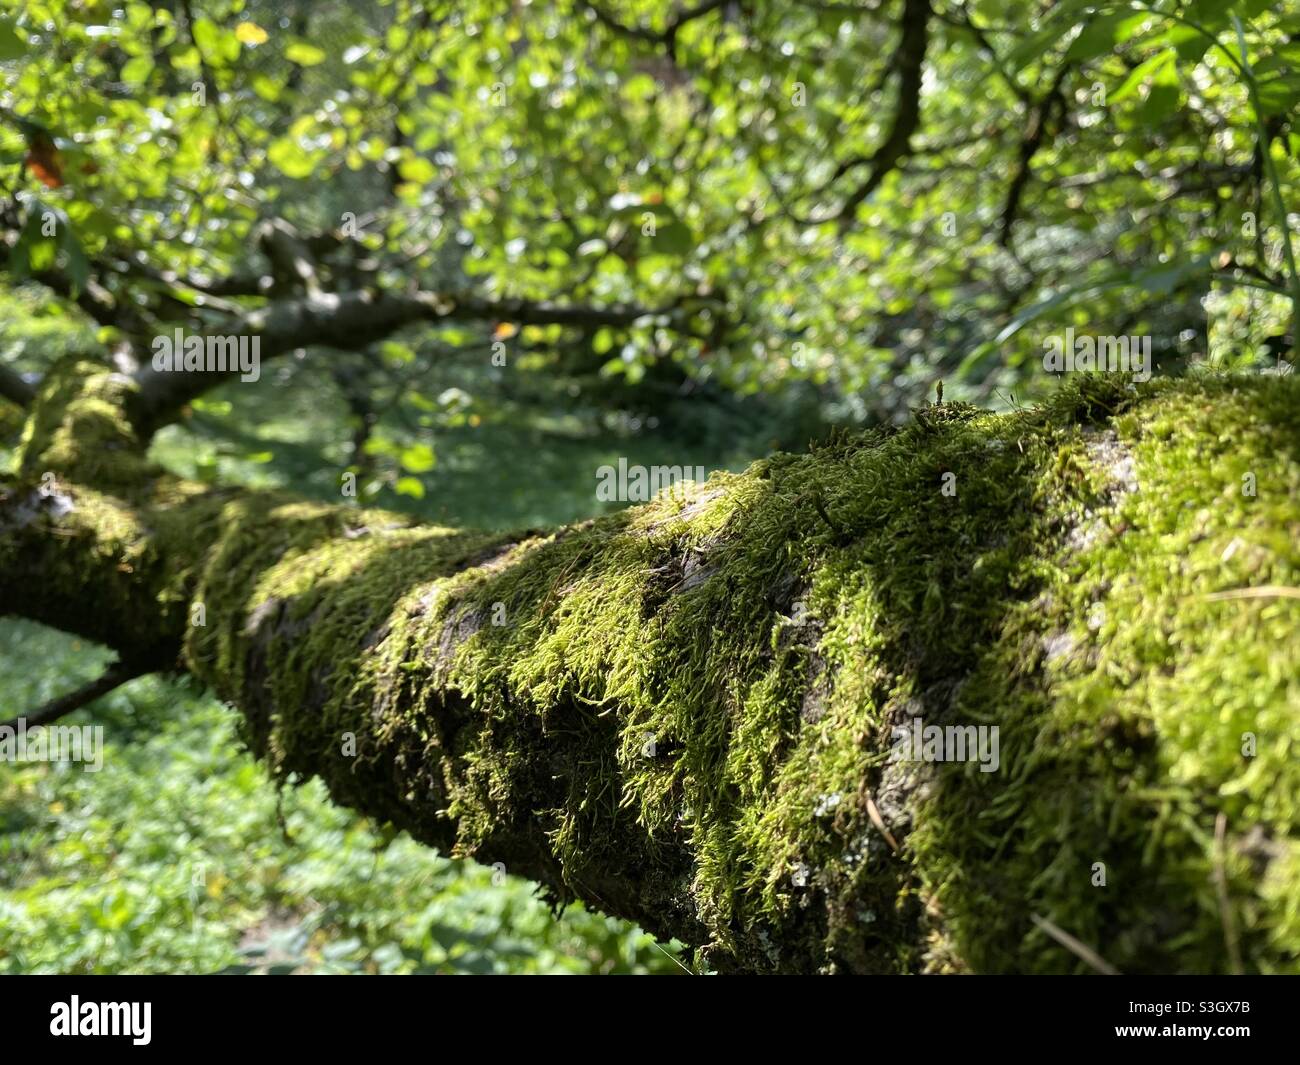 Mossy apple tree branch in the garden Stock Photo